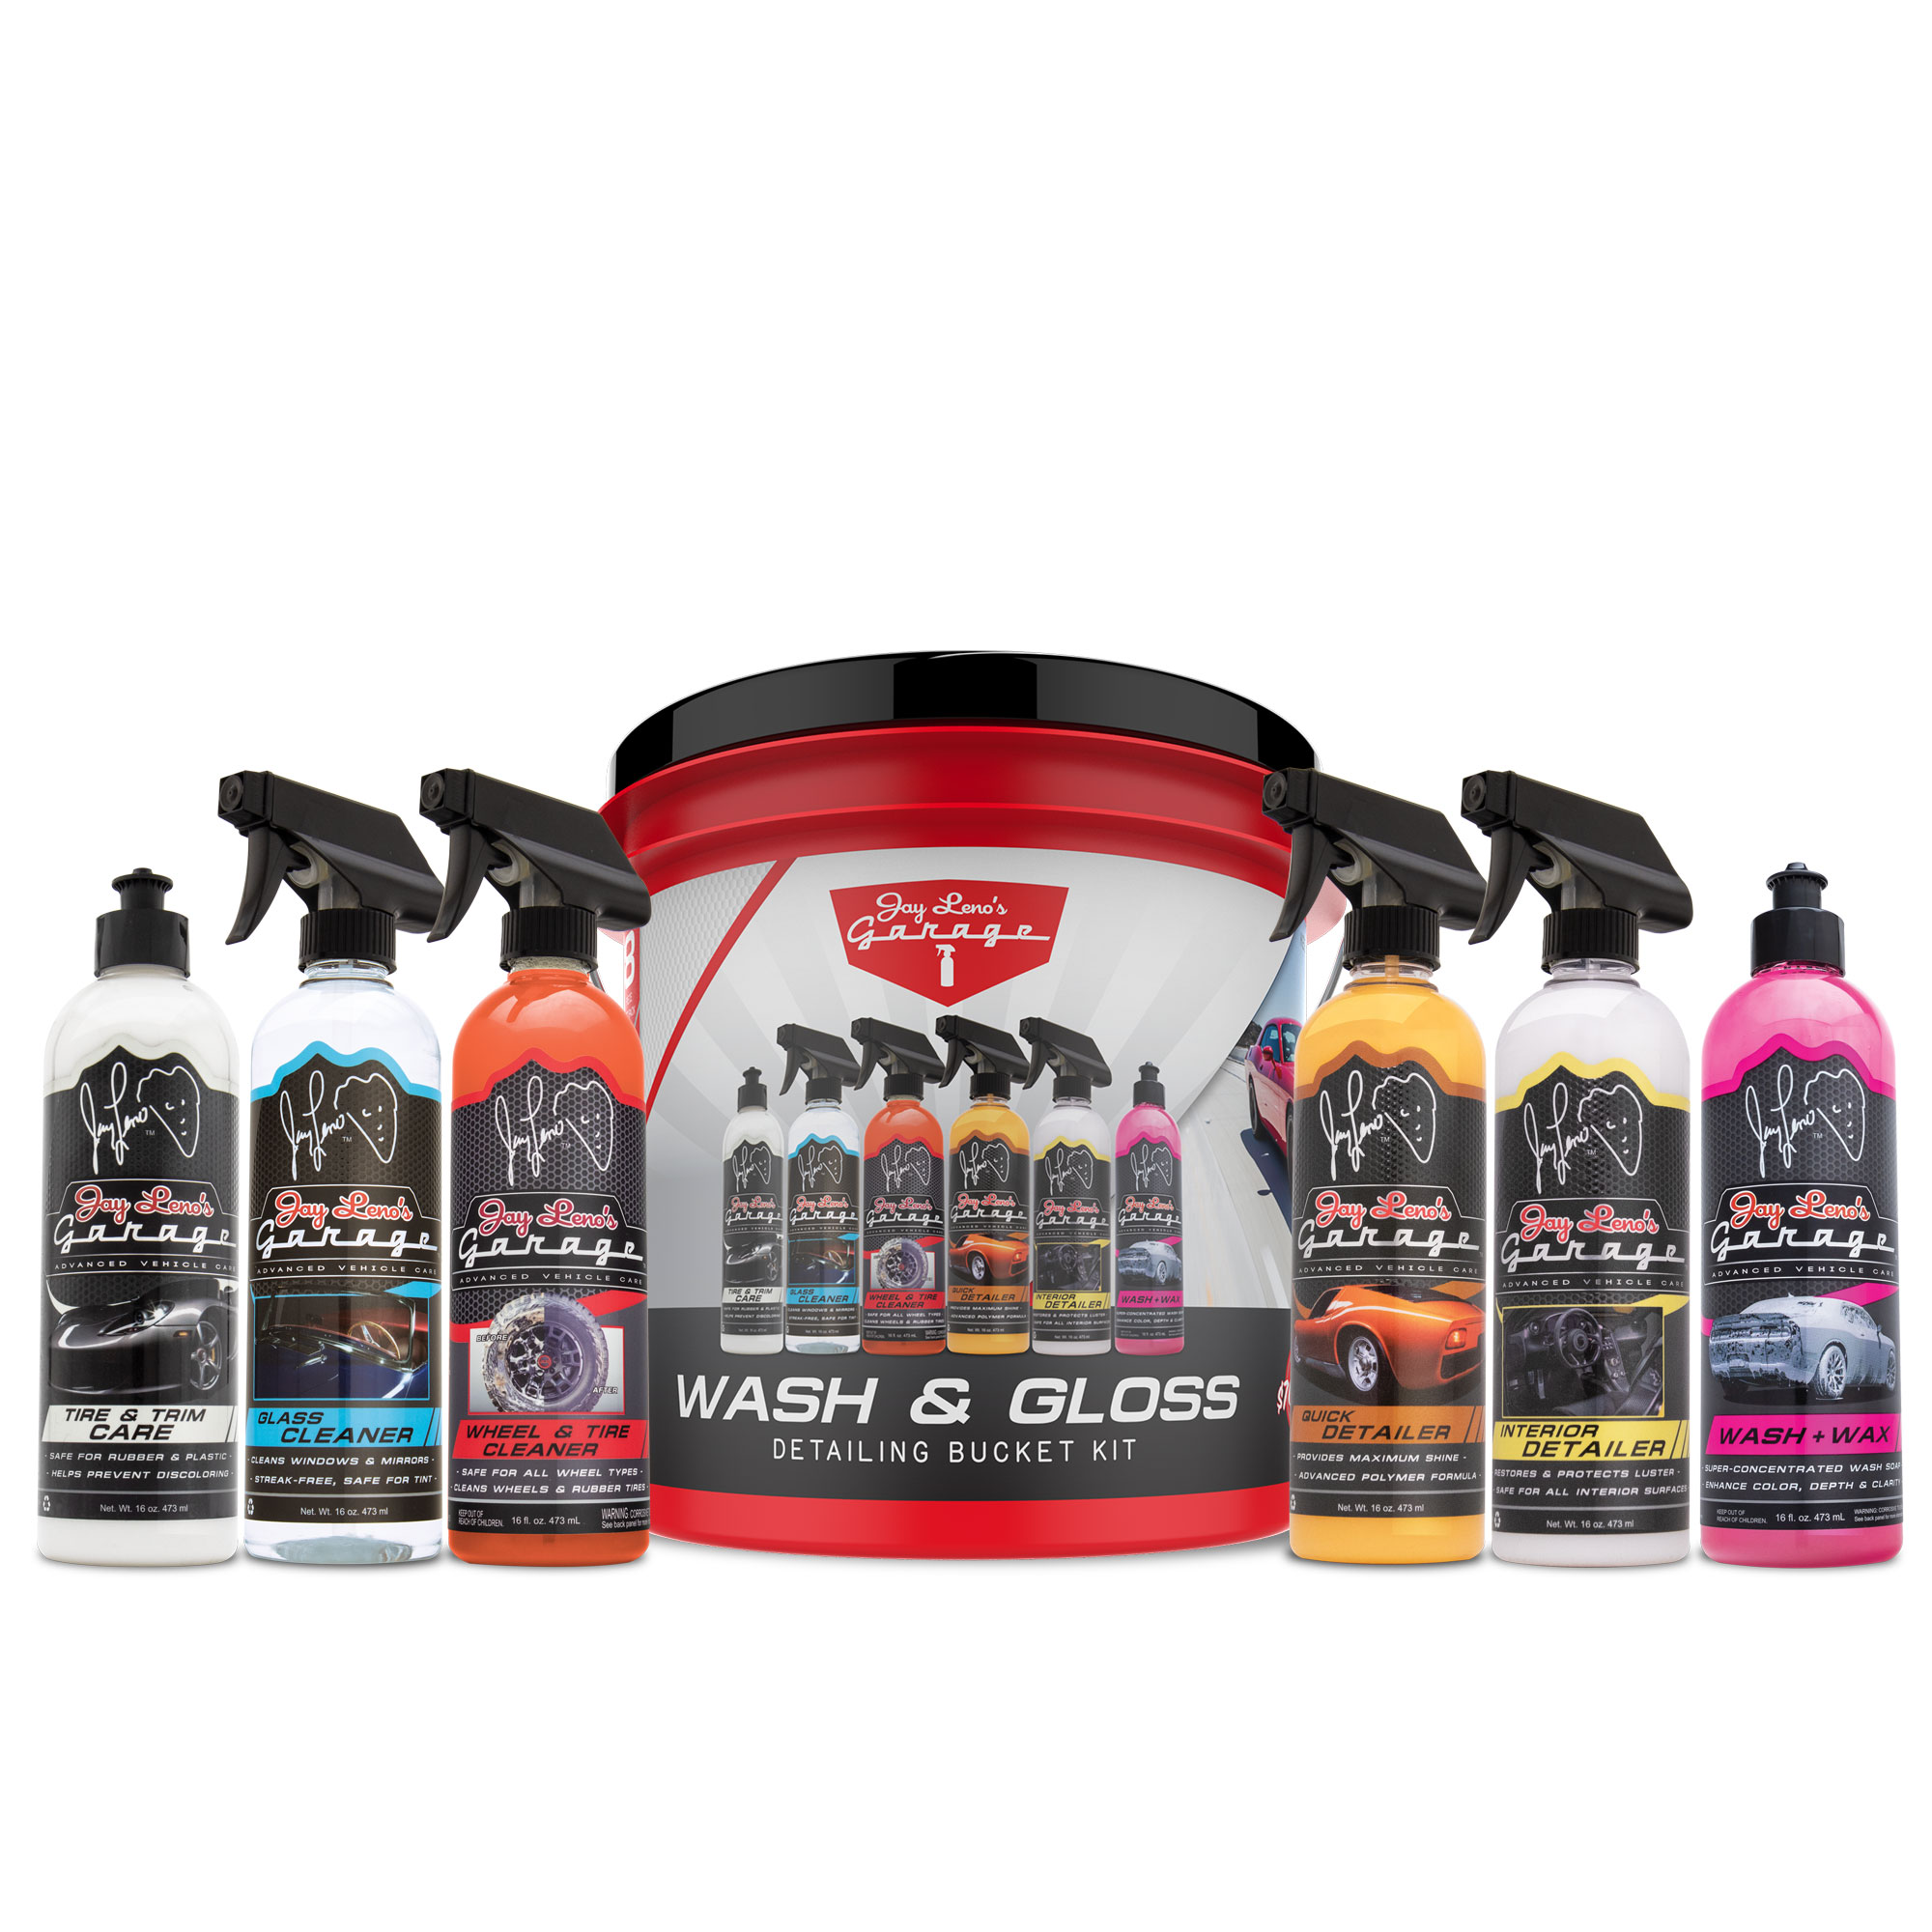 Jay Leno's Garage Wash & Gloss 8-Piece Detailing Bucket Kit - Wash, Clean & Protect - image 1 of 26